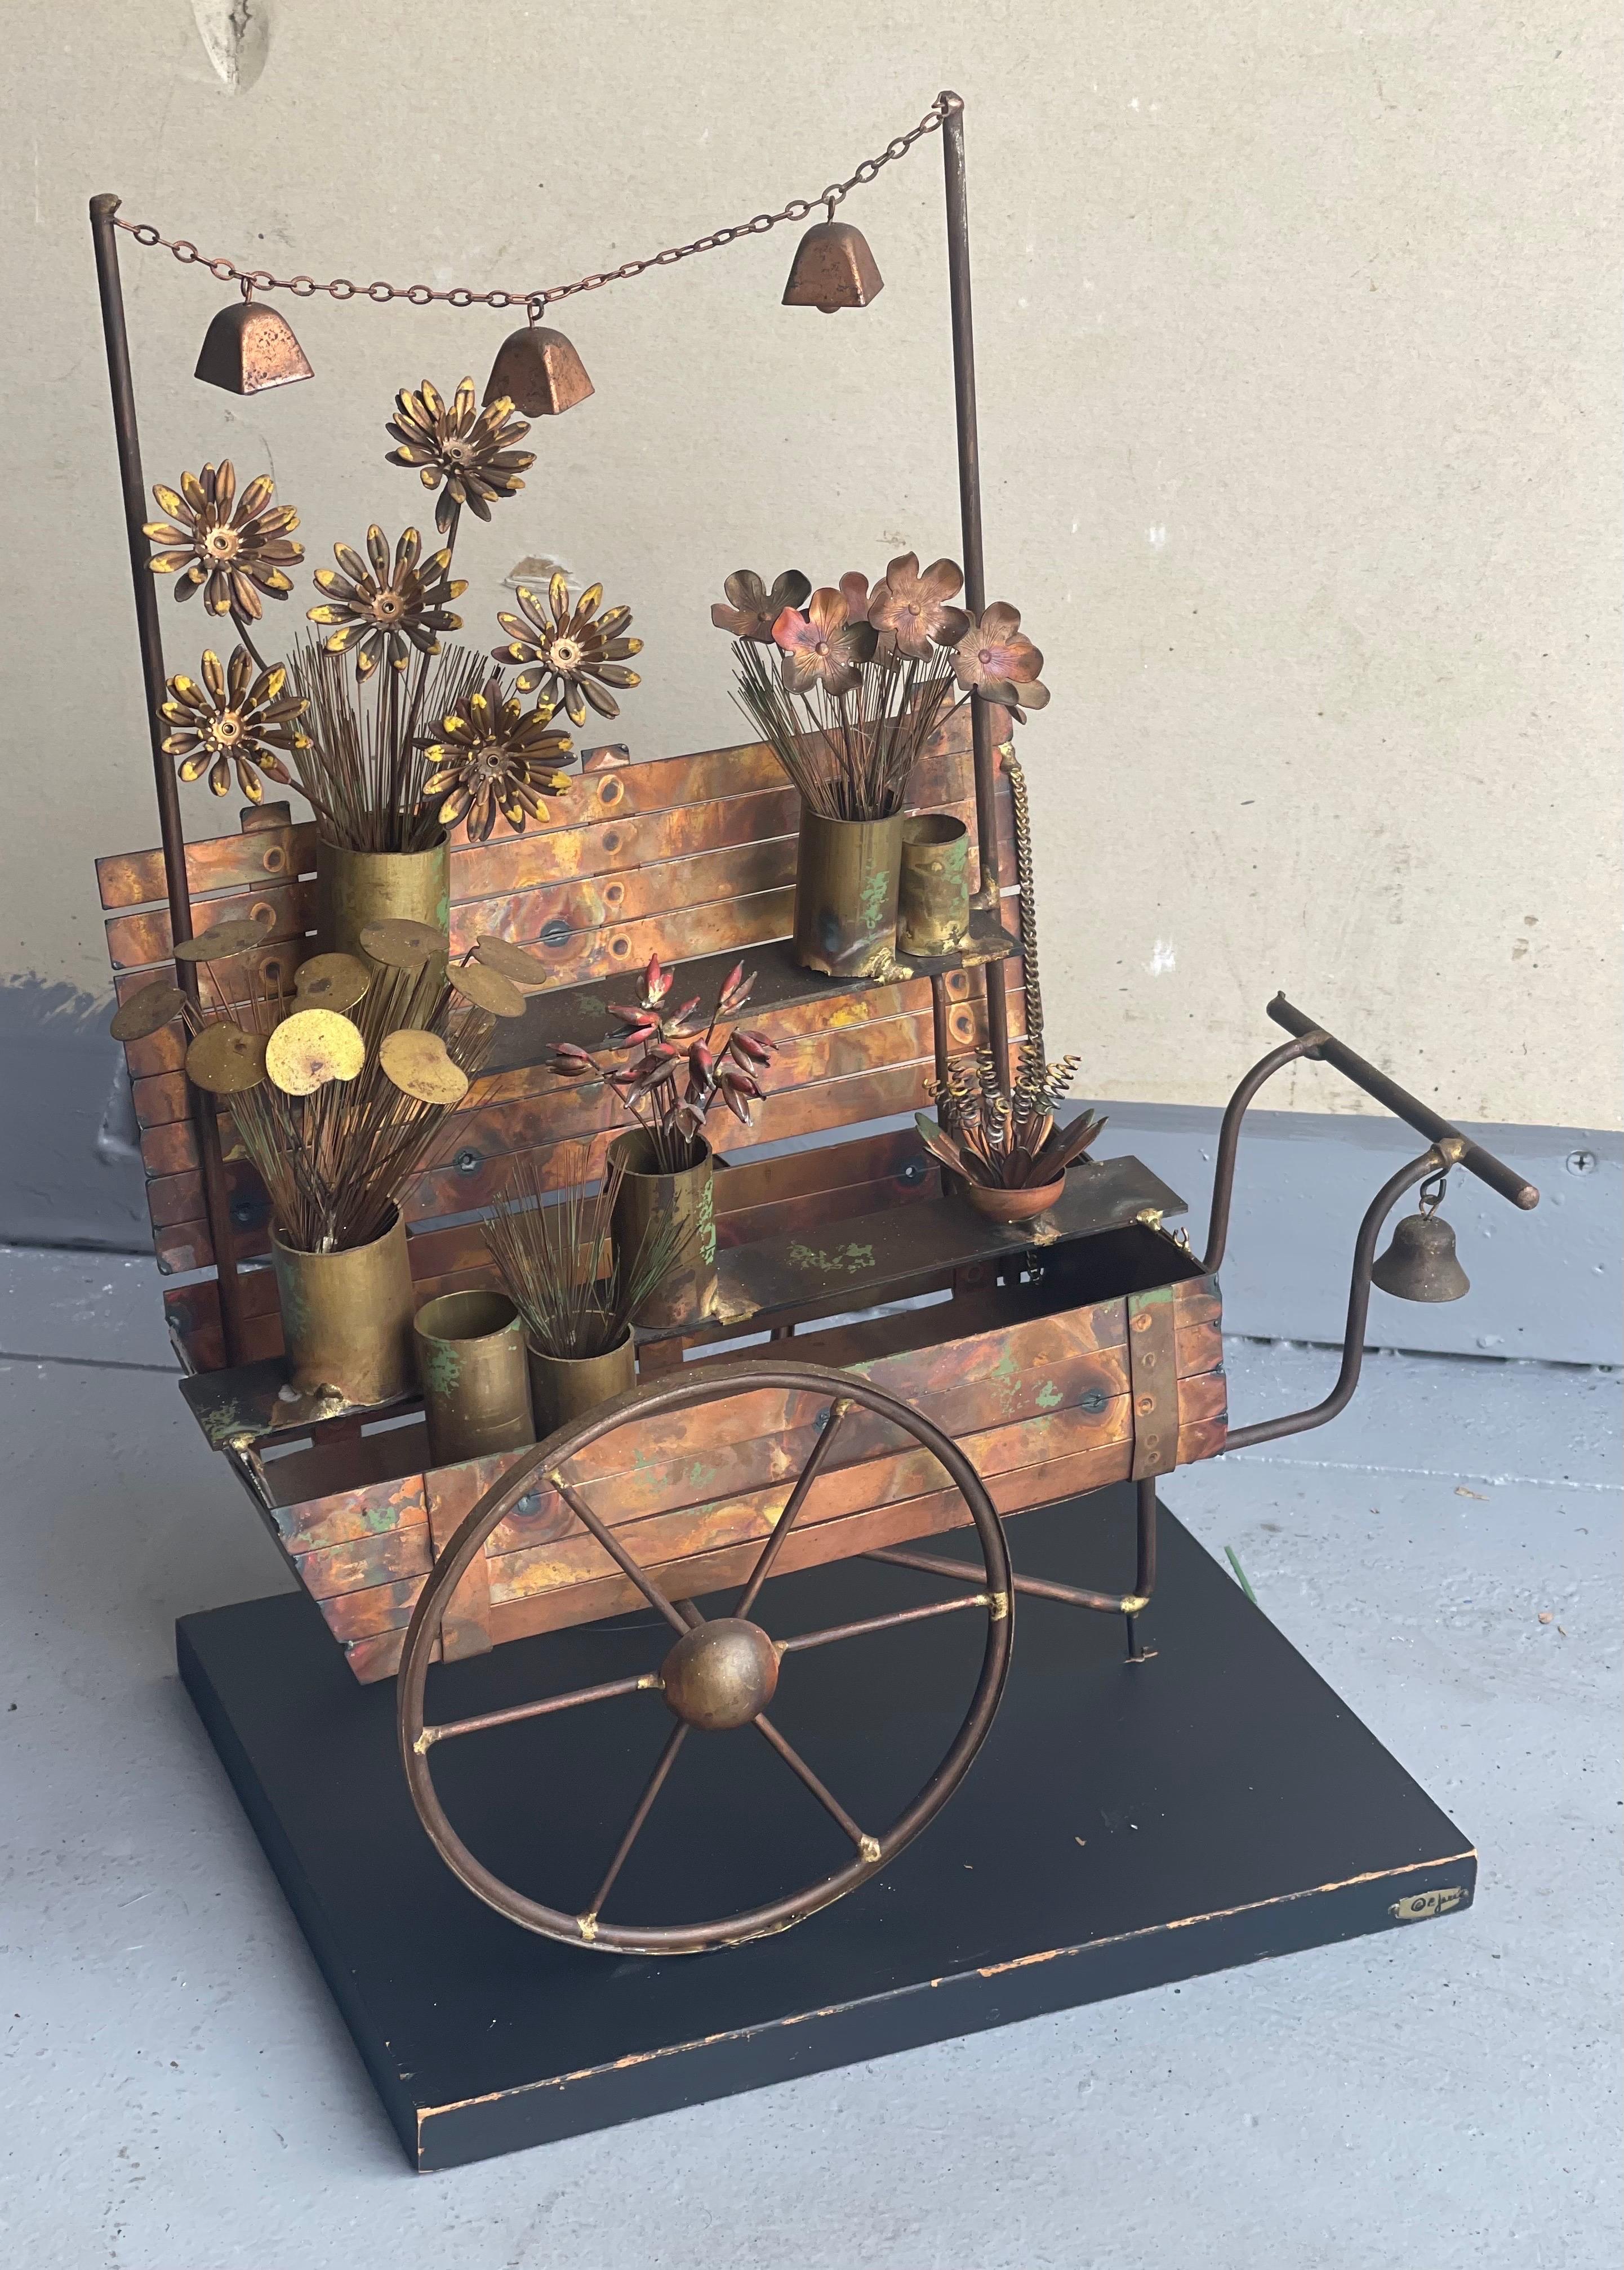 A hard to find mixed metal flower cart sculpture by C. Jere for Artisan House, circa 1970s. The piece has tremendous detail and craftsmanship incuding working bells and measures 13